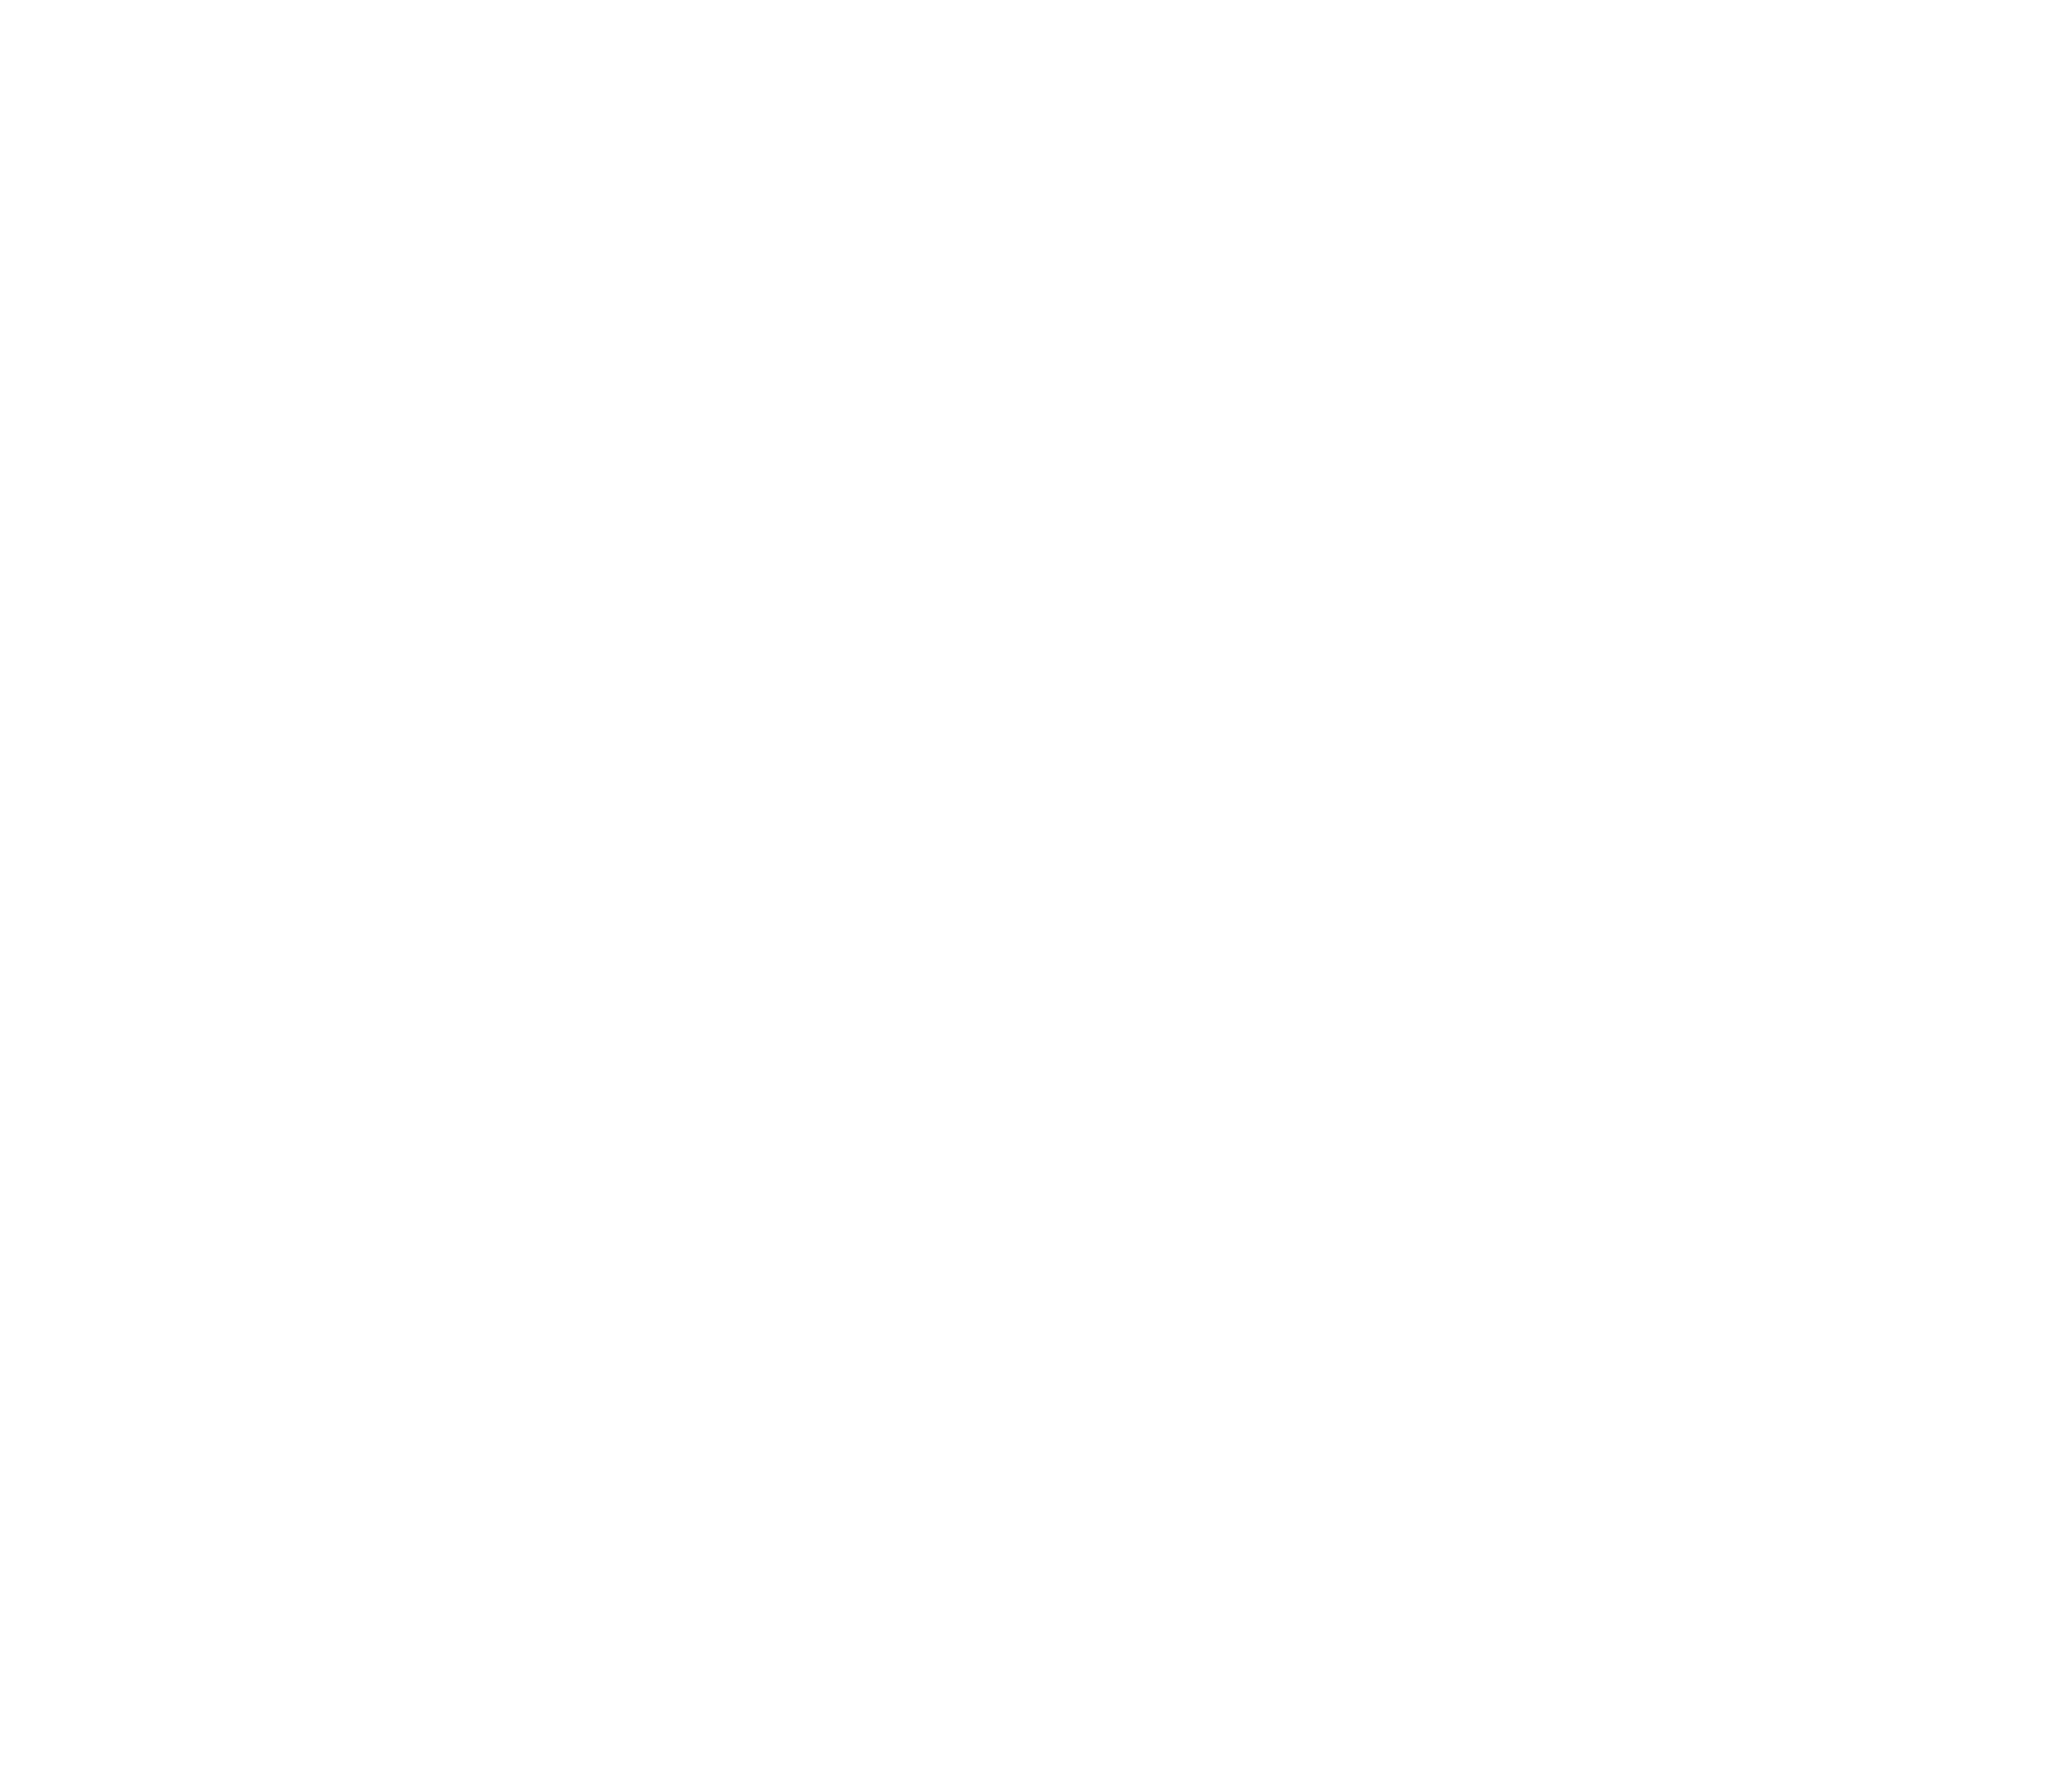 ANAB%20Symbol%20White%2017021-1%20Management%20Systems%20CB.png